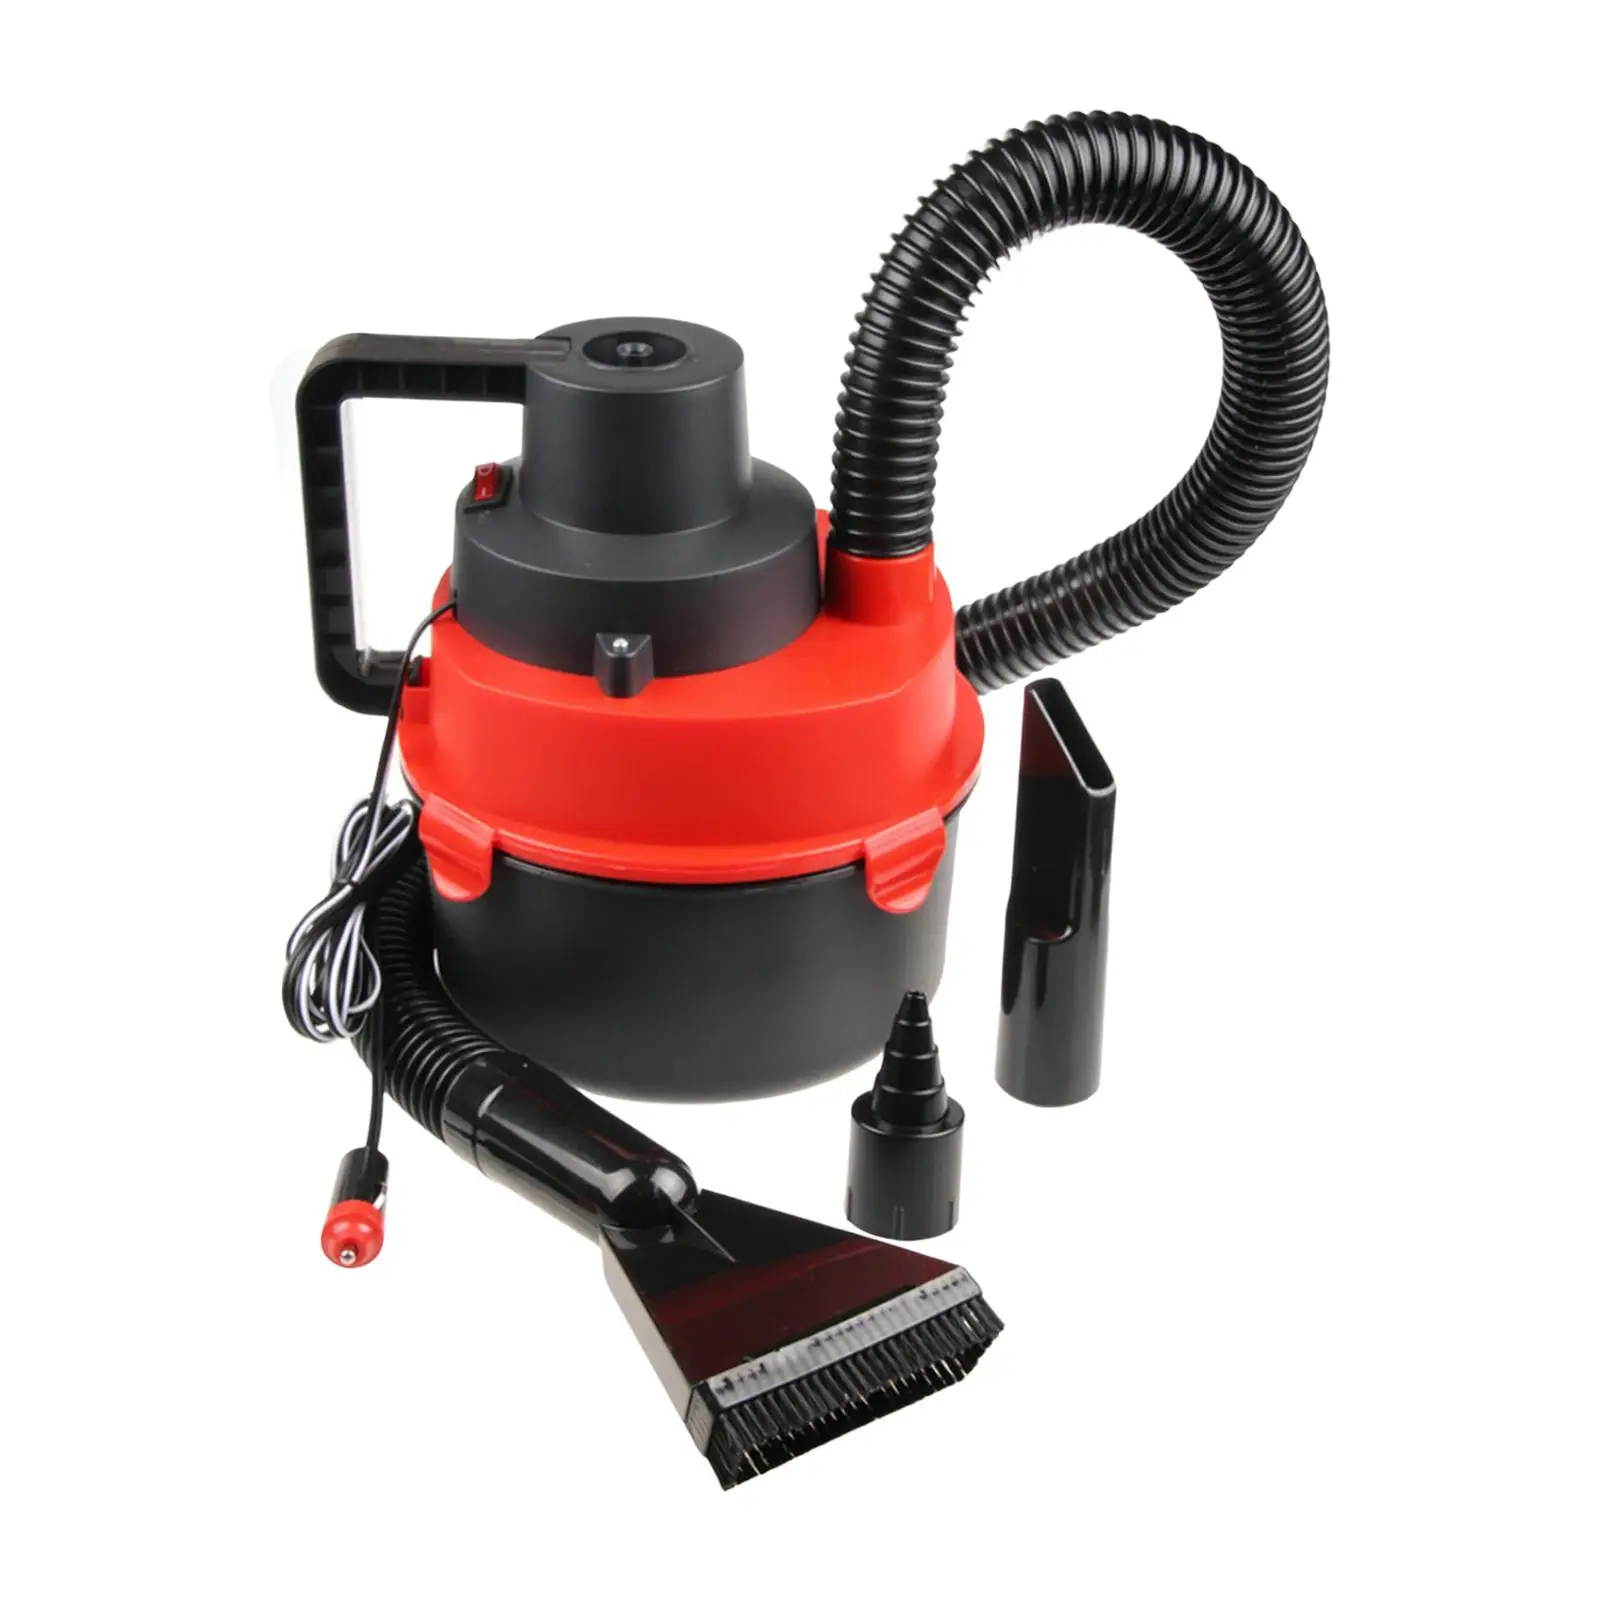 12 Volt Wet Dry Car Auto Canister Vacuum Flexible Hose Durable Red and Black